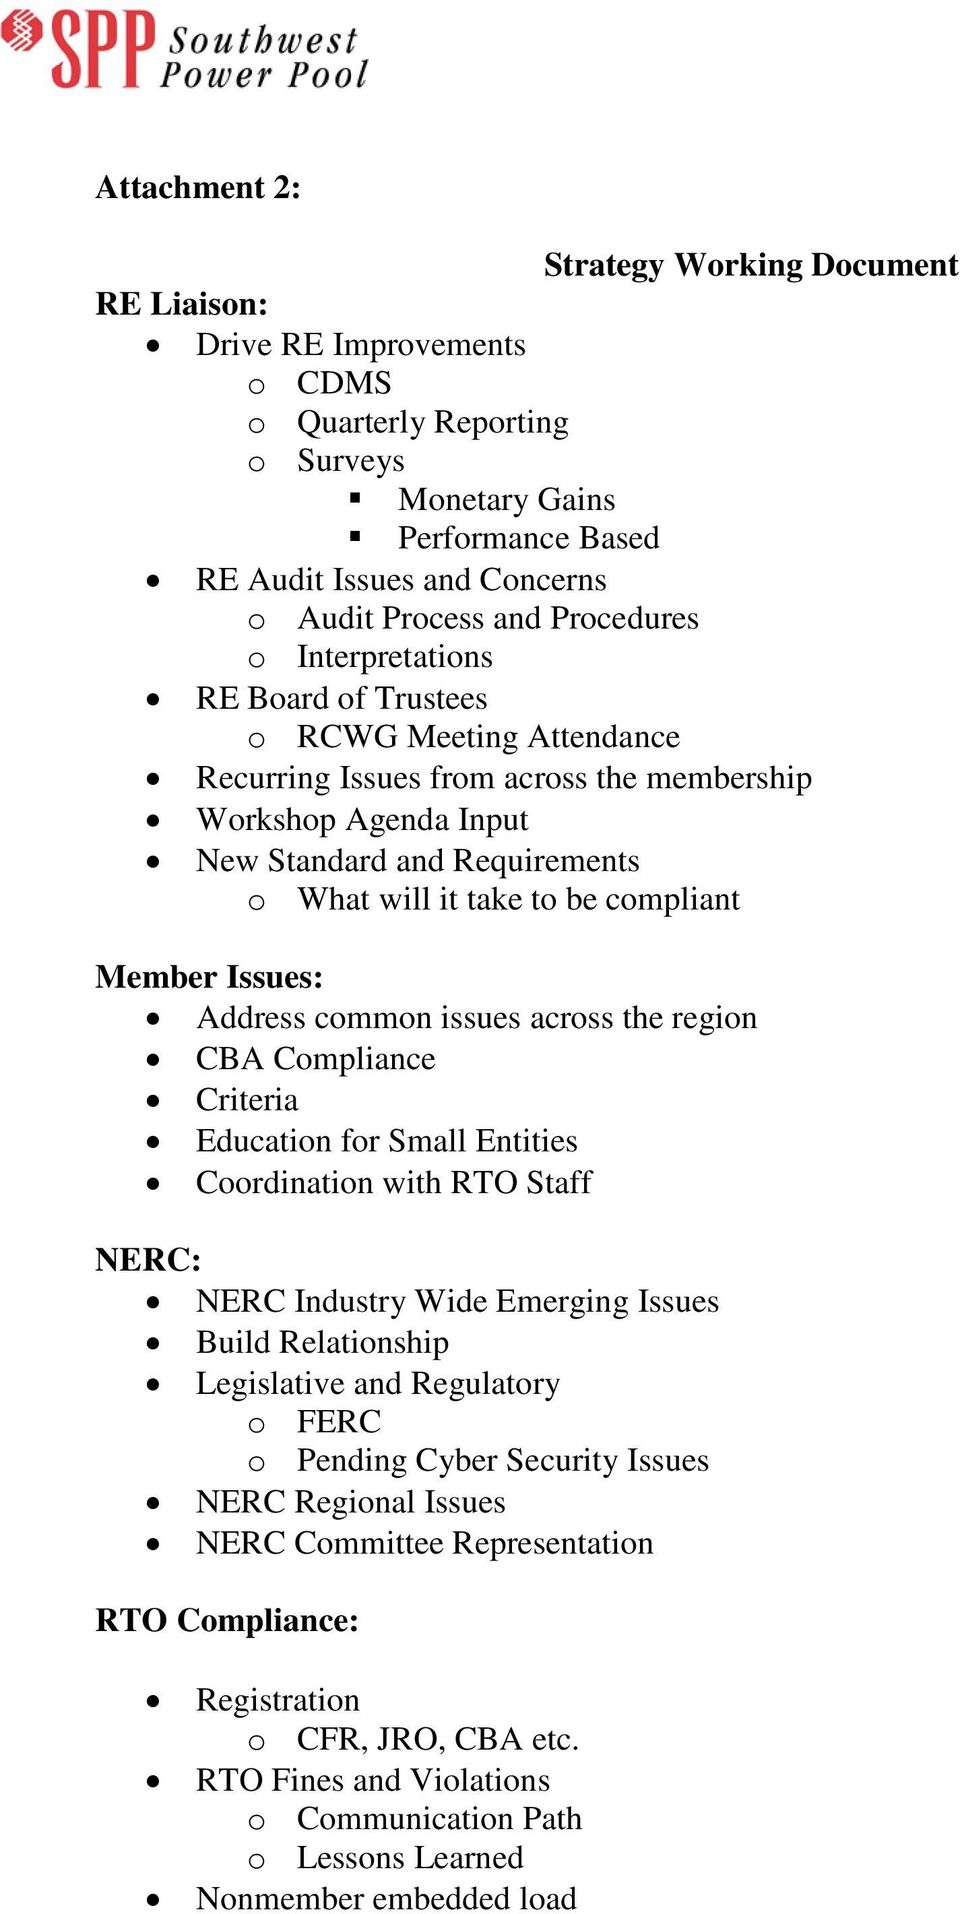 compliant Member Issues: Address common issues across the region CBA Compliance Criteria Education for Small Entities Coordination with RTO Staff NERC: NERC Industry Wide Emerging Issues Build